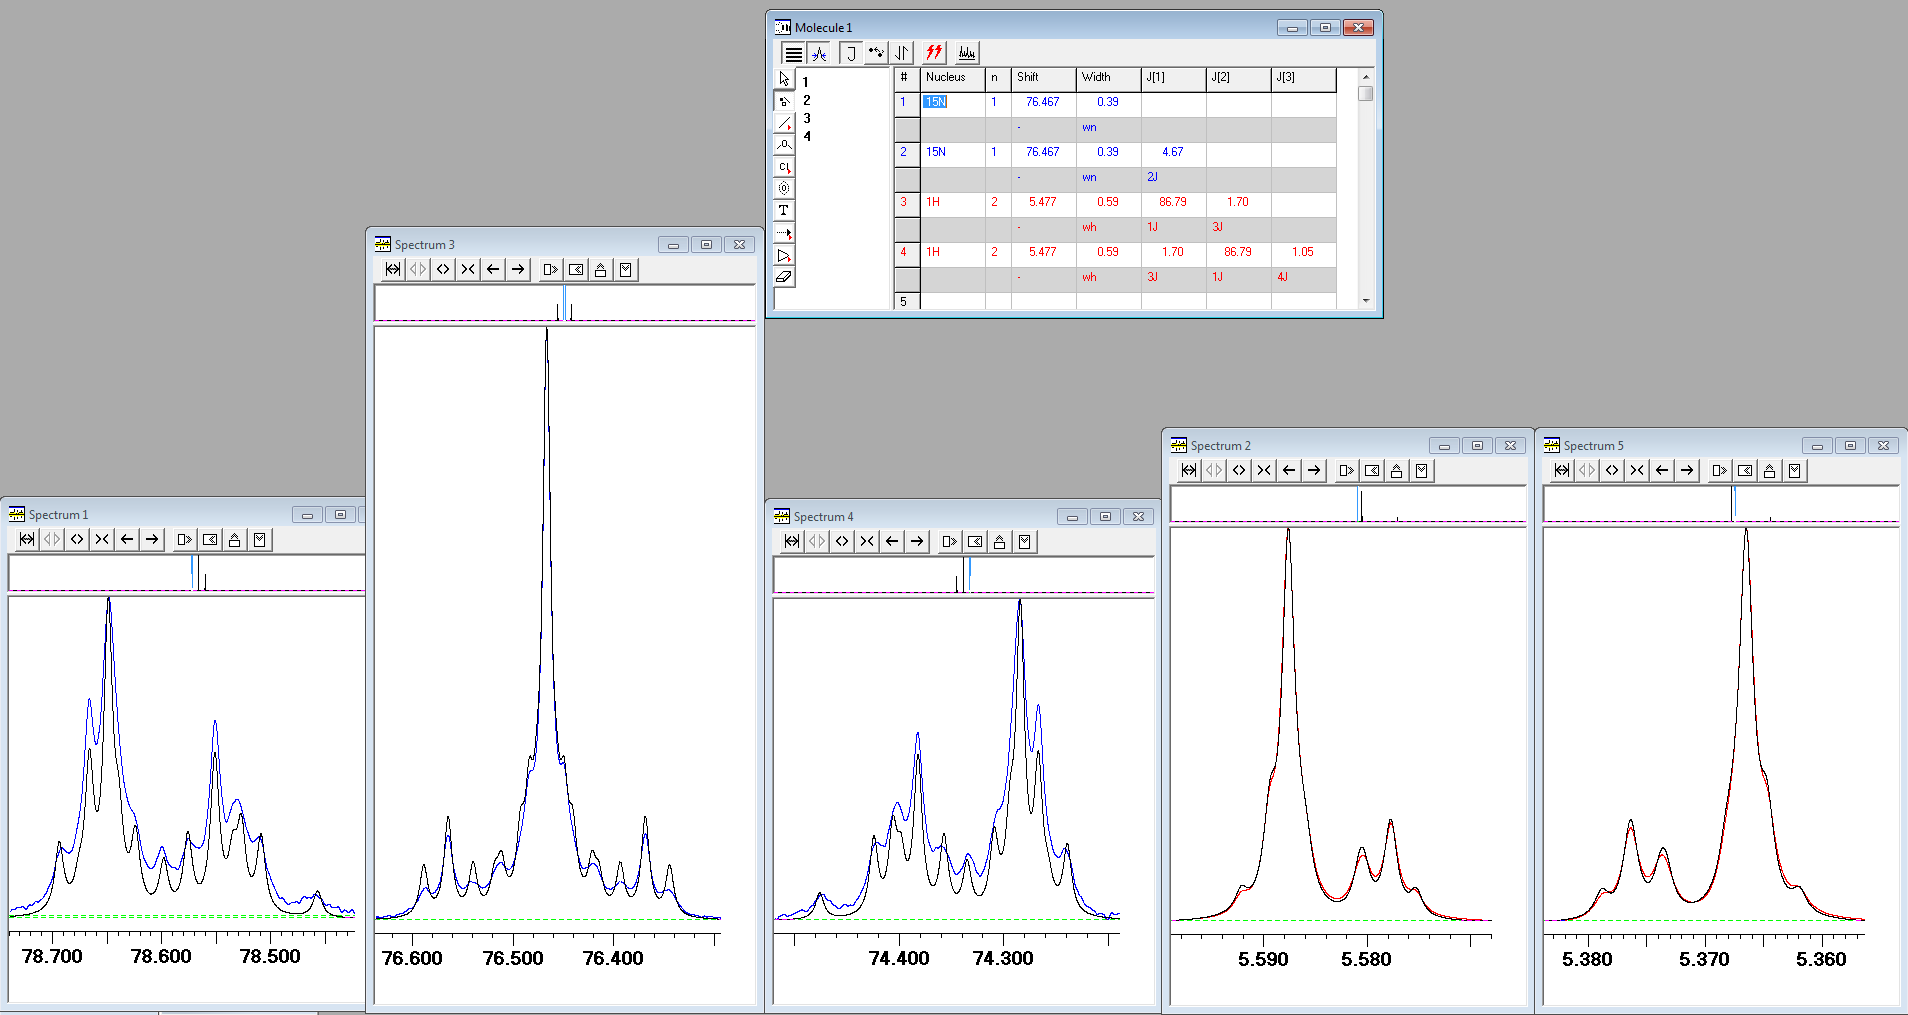 1H and 15N spectra of 15N labelled urea